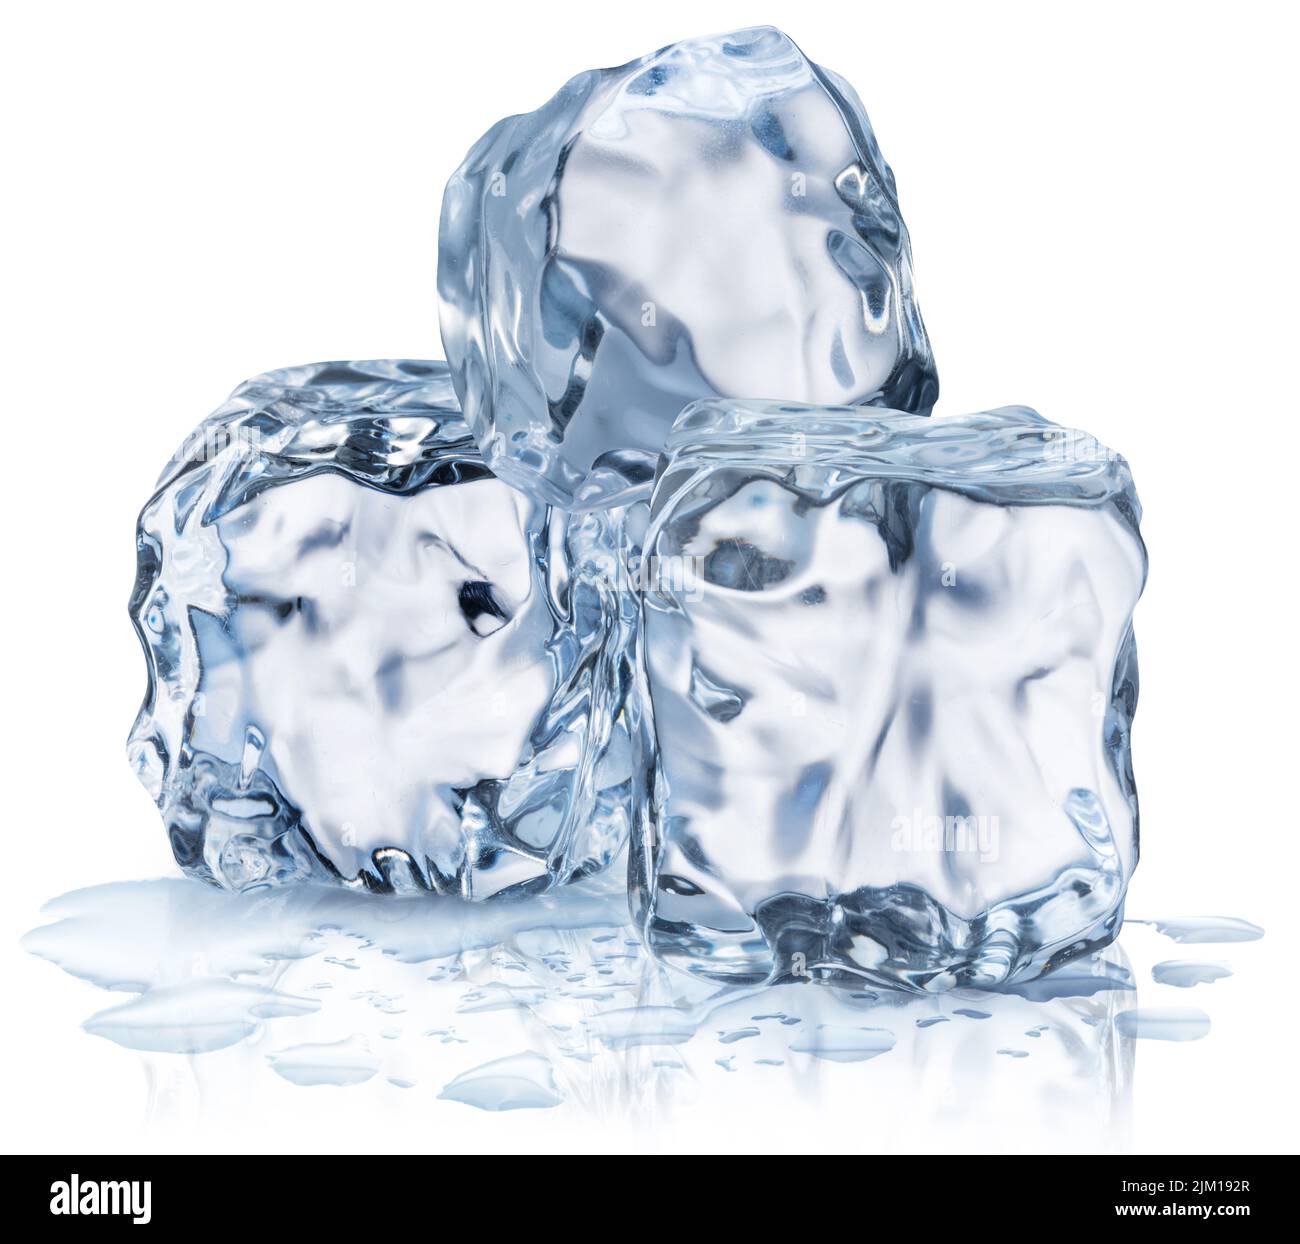 Three melting ice cubes in water puddle. File contains clipping paths. Stock Photo